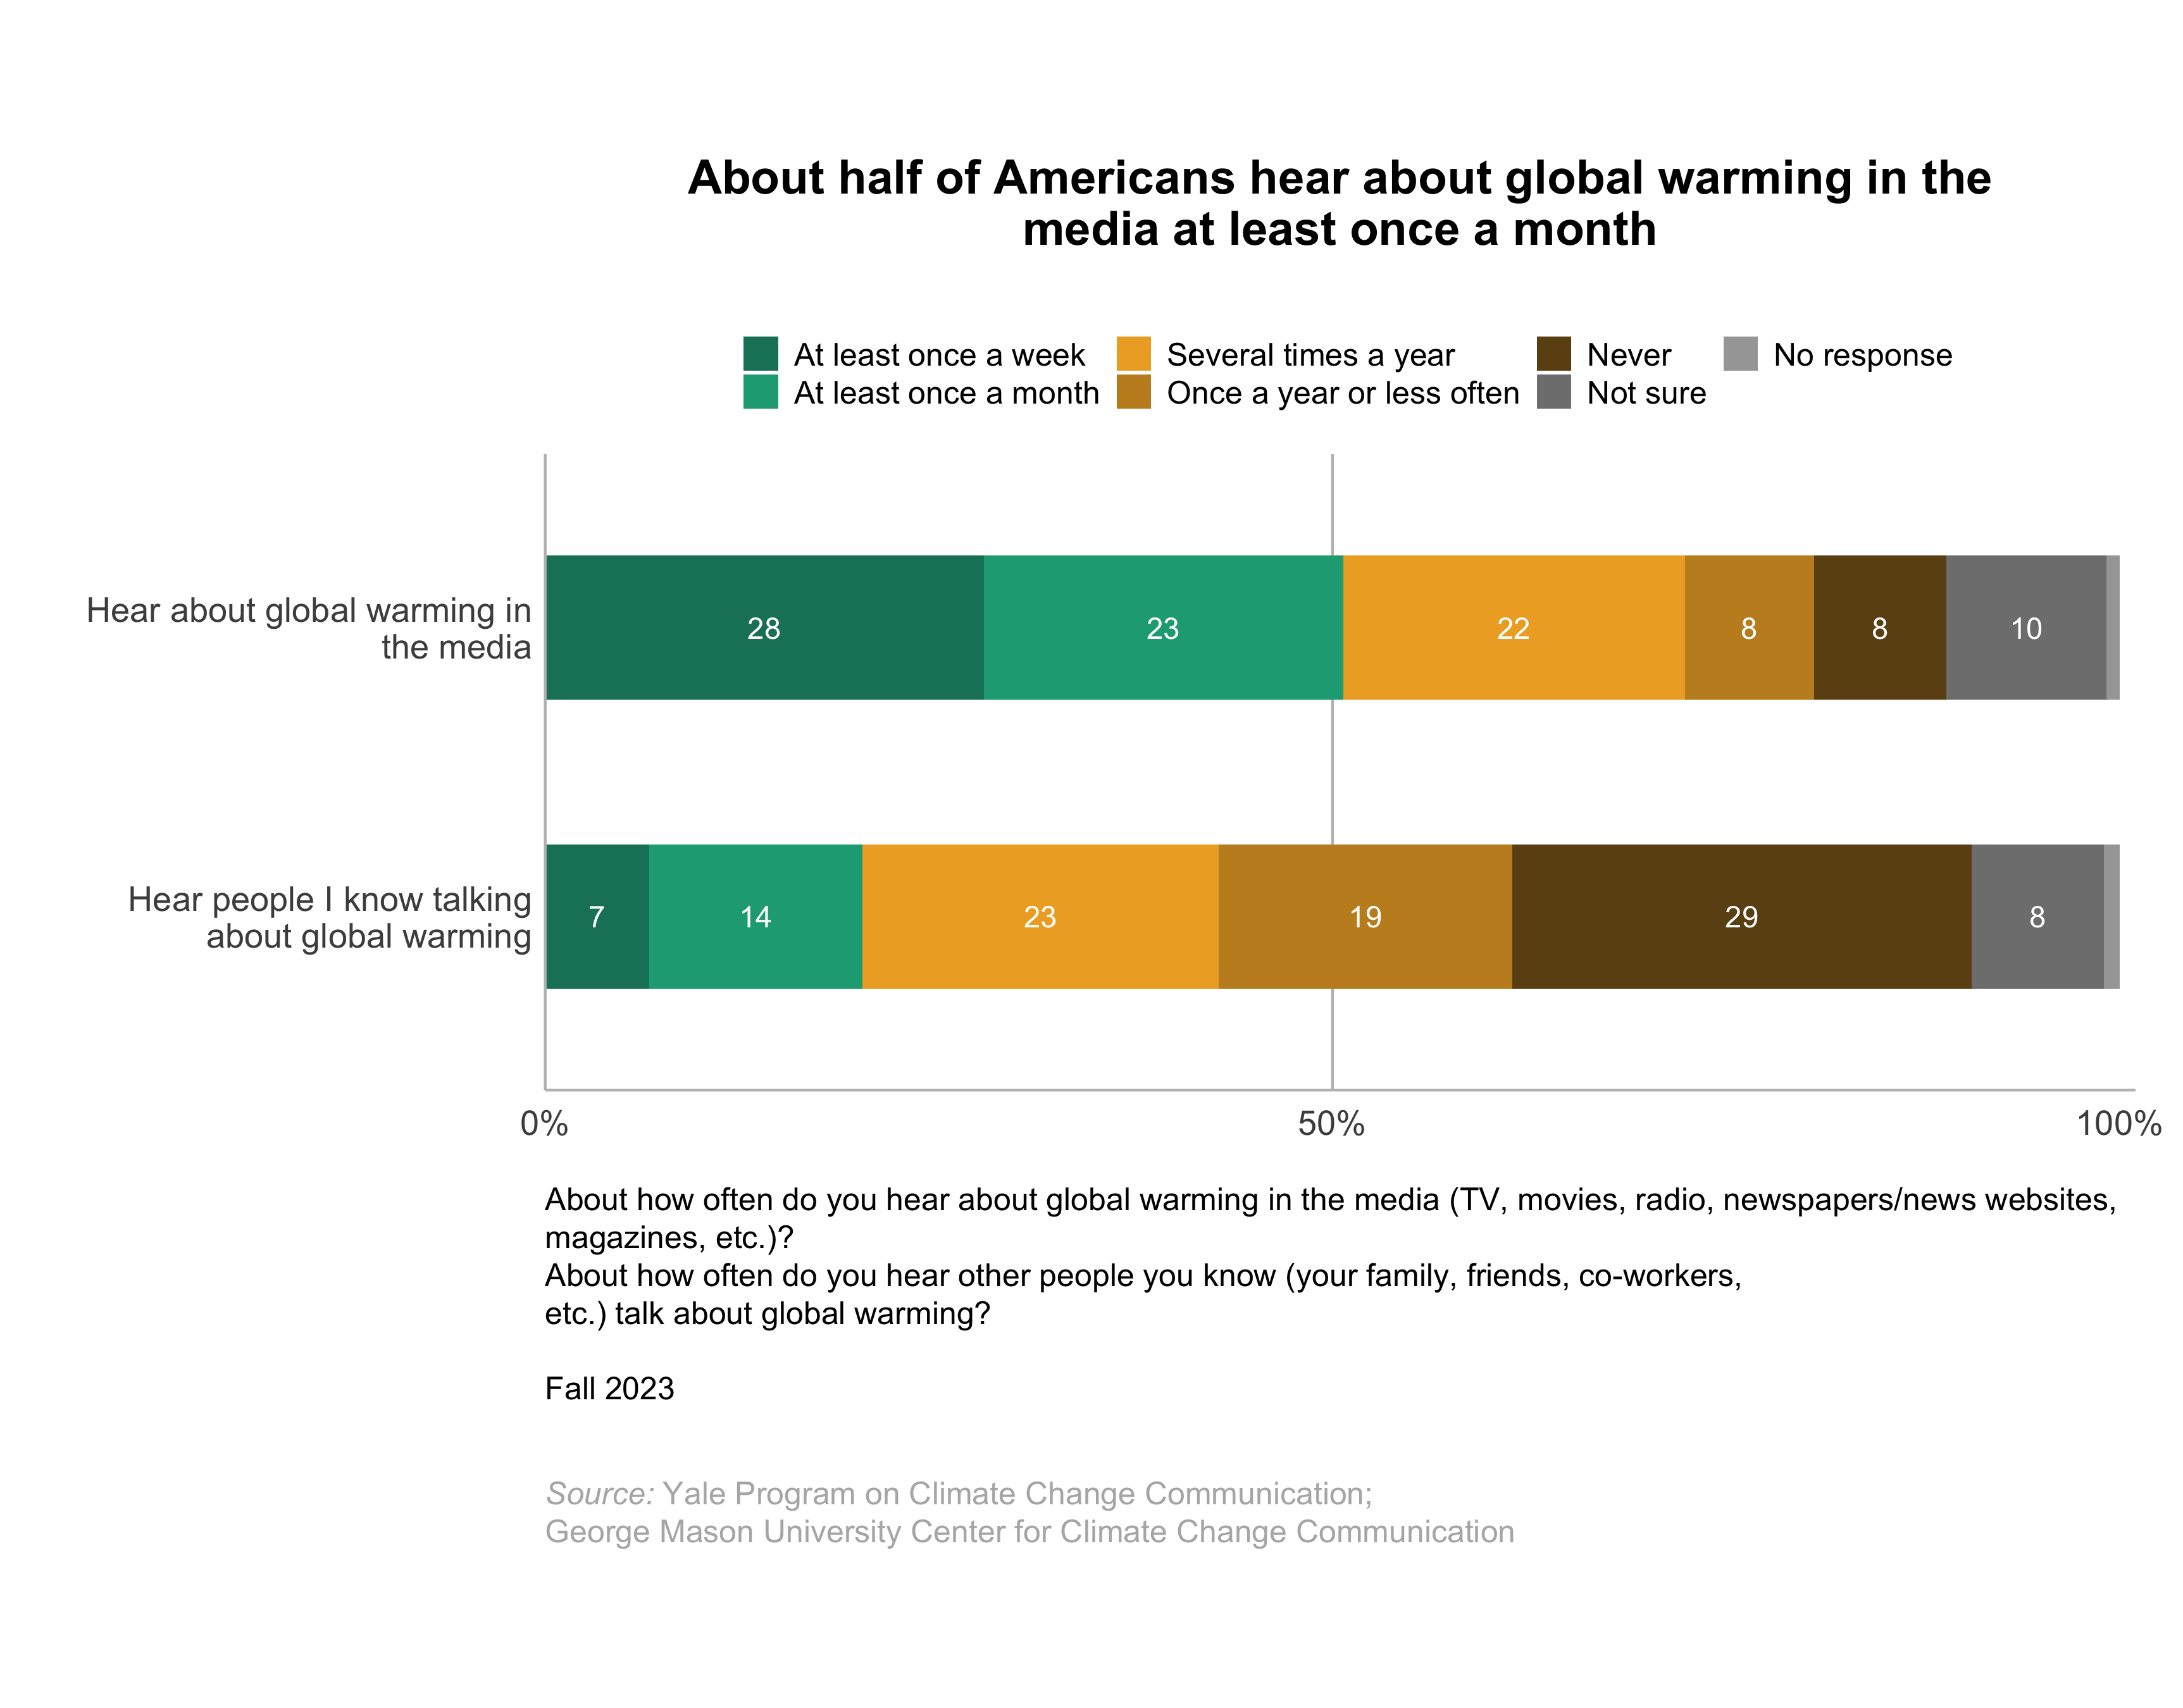 These bar charts show the percentage of Americans who hear about global warming in the media and hear other people they know talking about global warming. About half of Americans hear about global warming in the media at least once a month. Data: Climate Change in the American Mind, Fall 2023. Refer to the data tables in Appendix 1 of the report for all percentages.